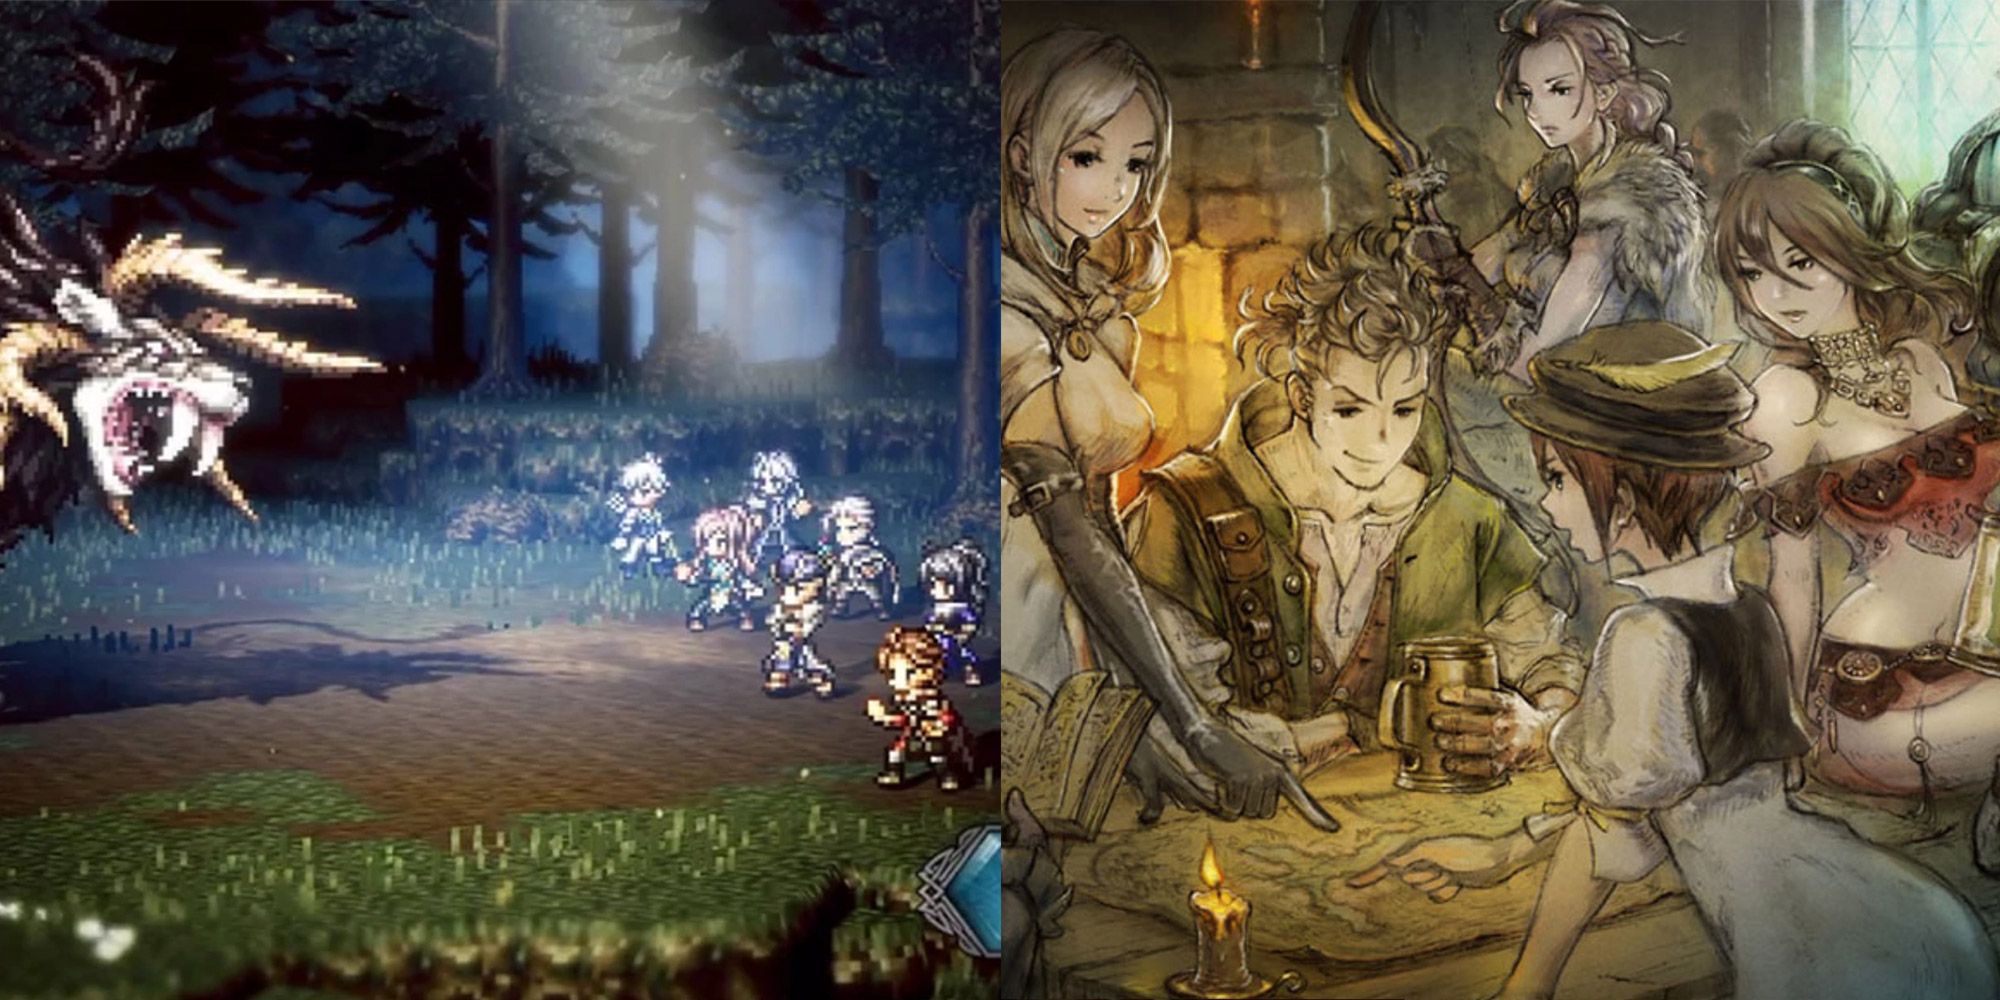 Octopath Traveler: Champions of the Continent - Metacritic